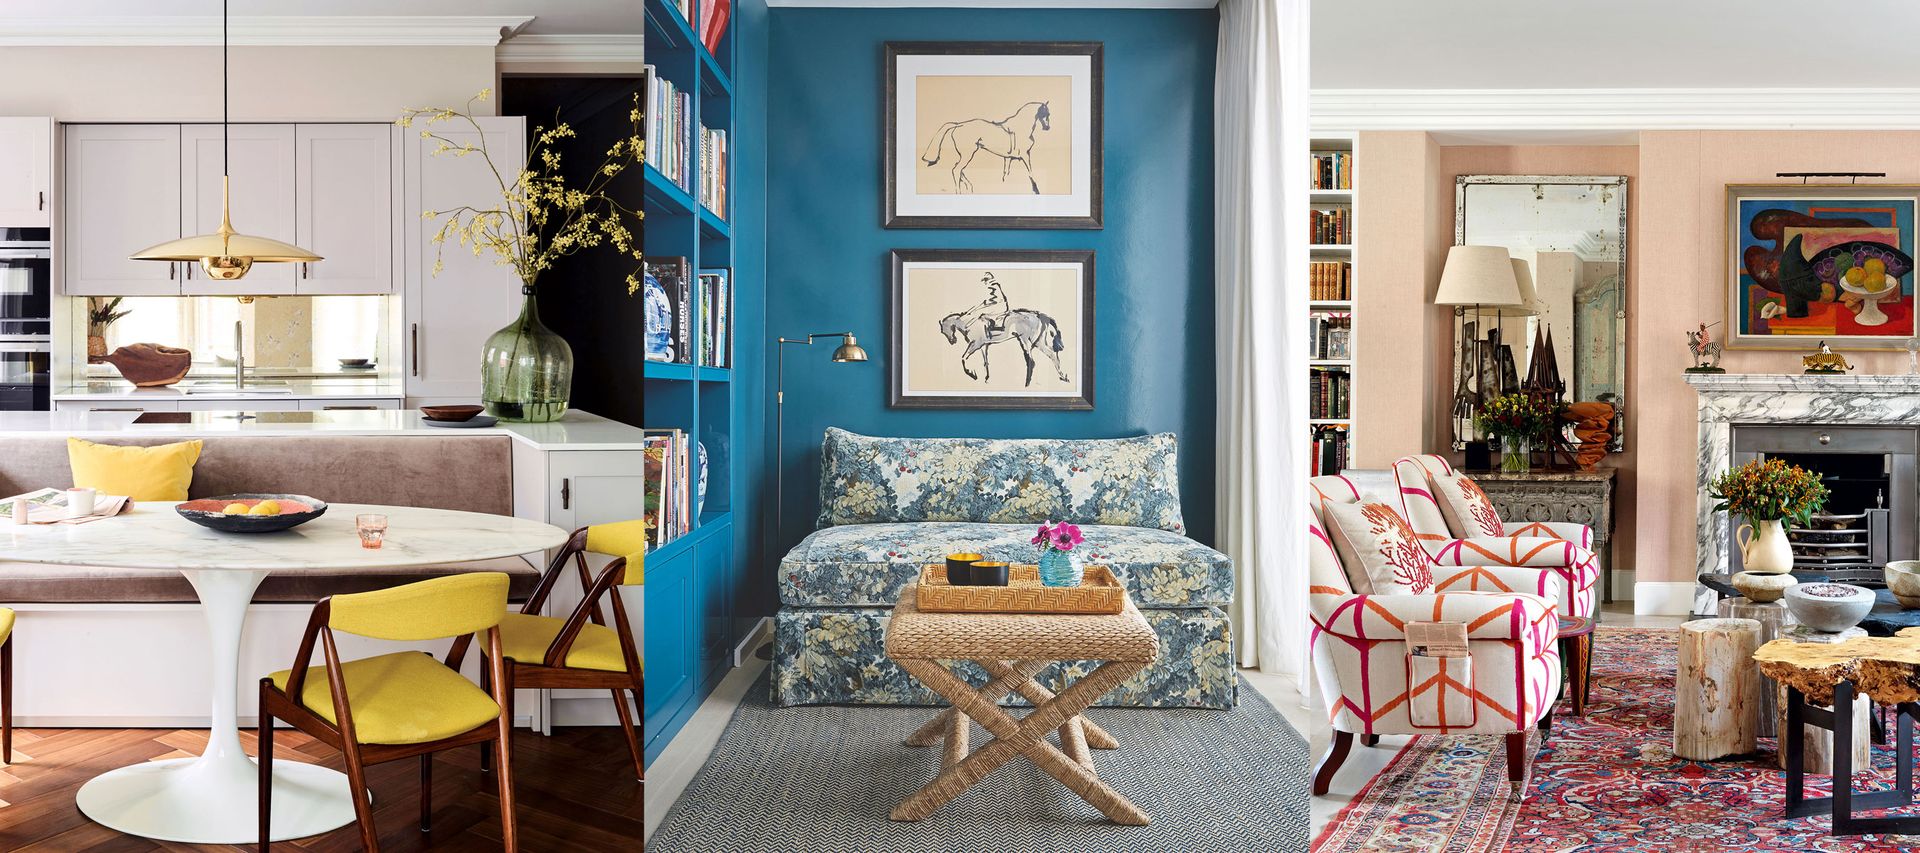 Accent chair ideas: 10 rules for chair layouts, looks and trends